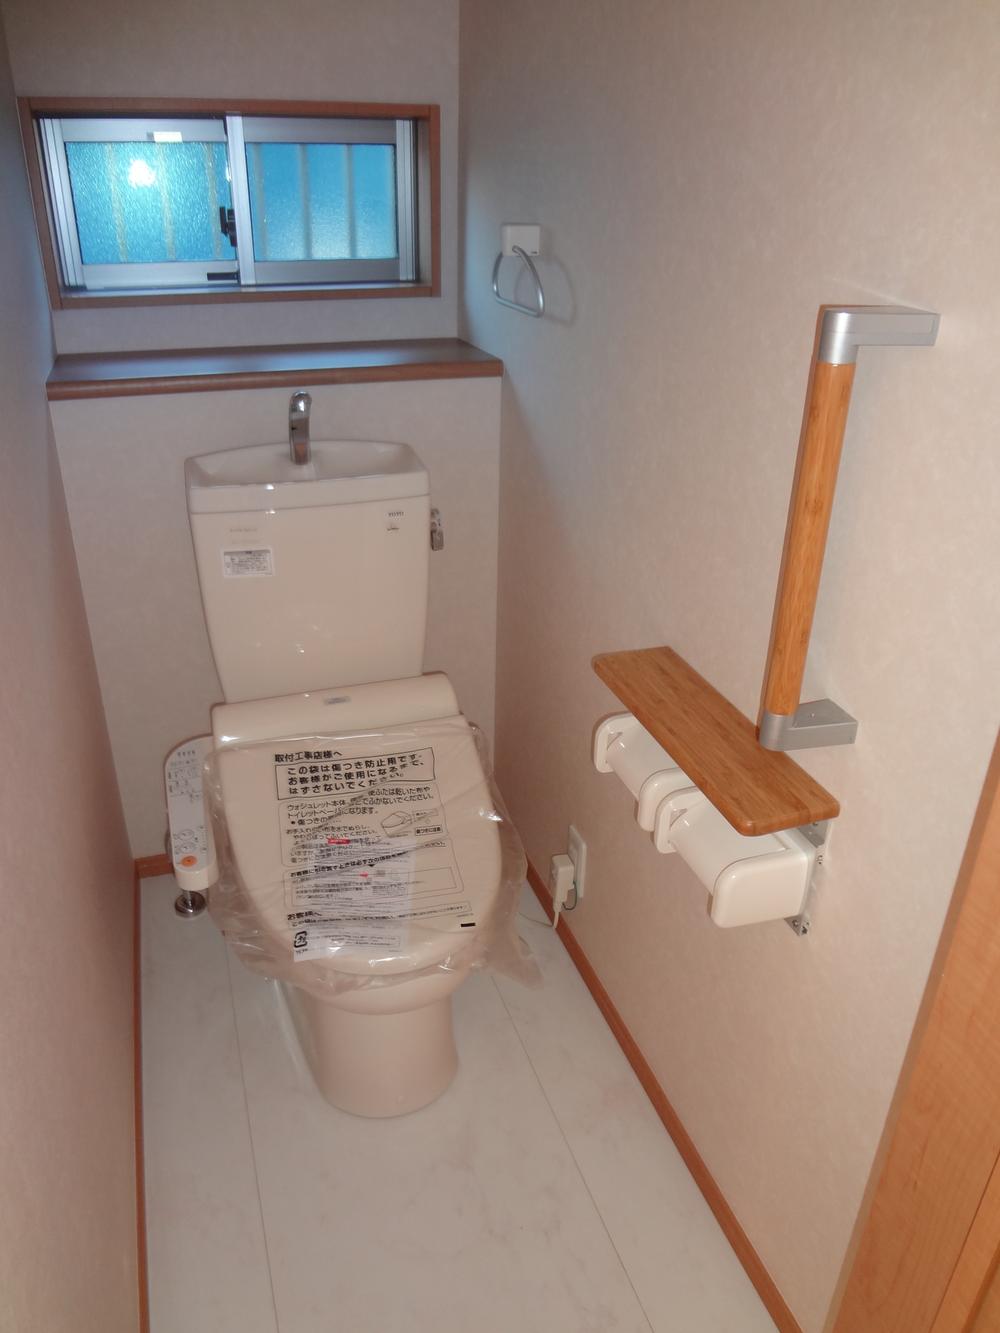 Toilet. Toilet construction example photo It has been installed on the first floor and the second floor.